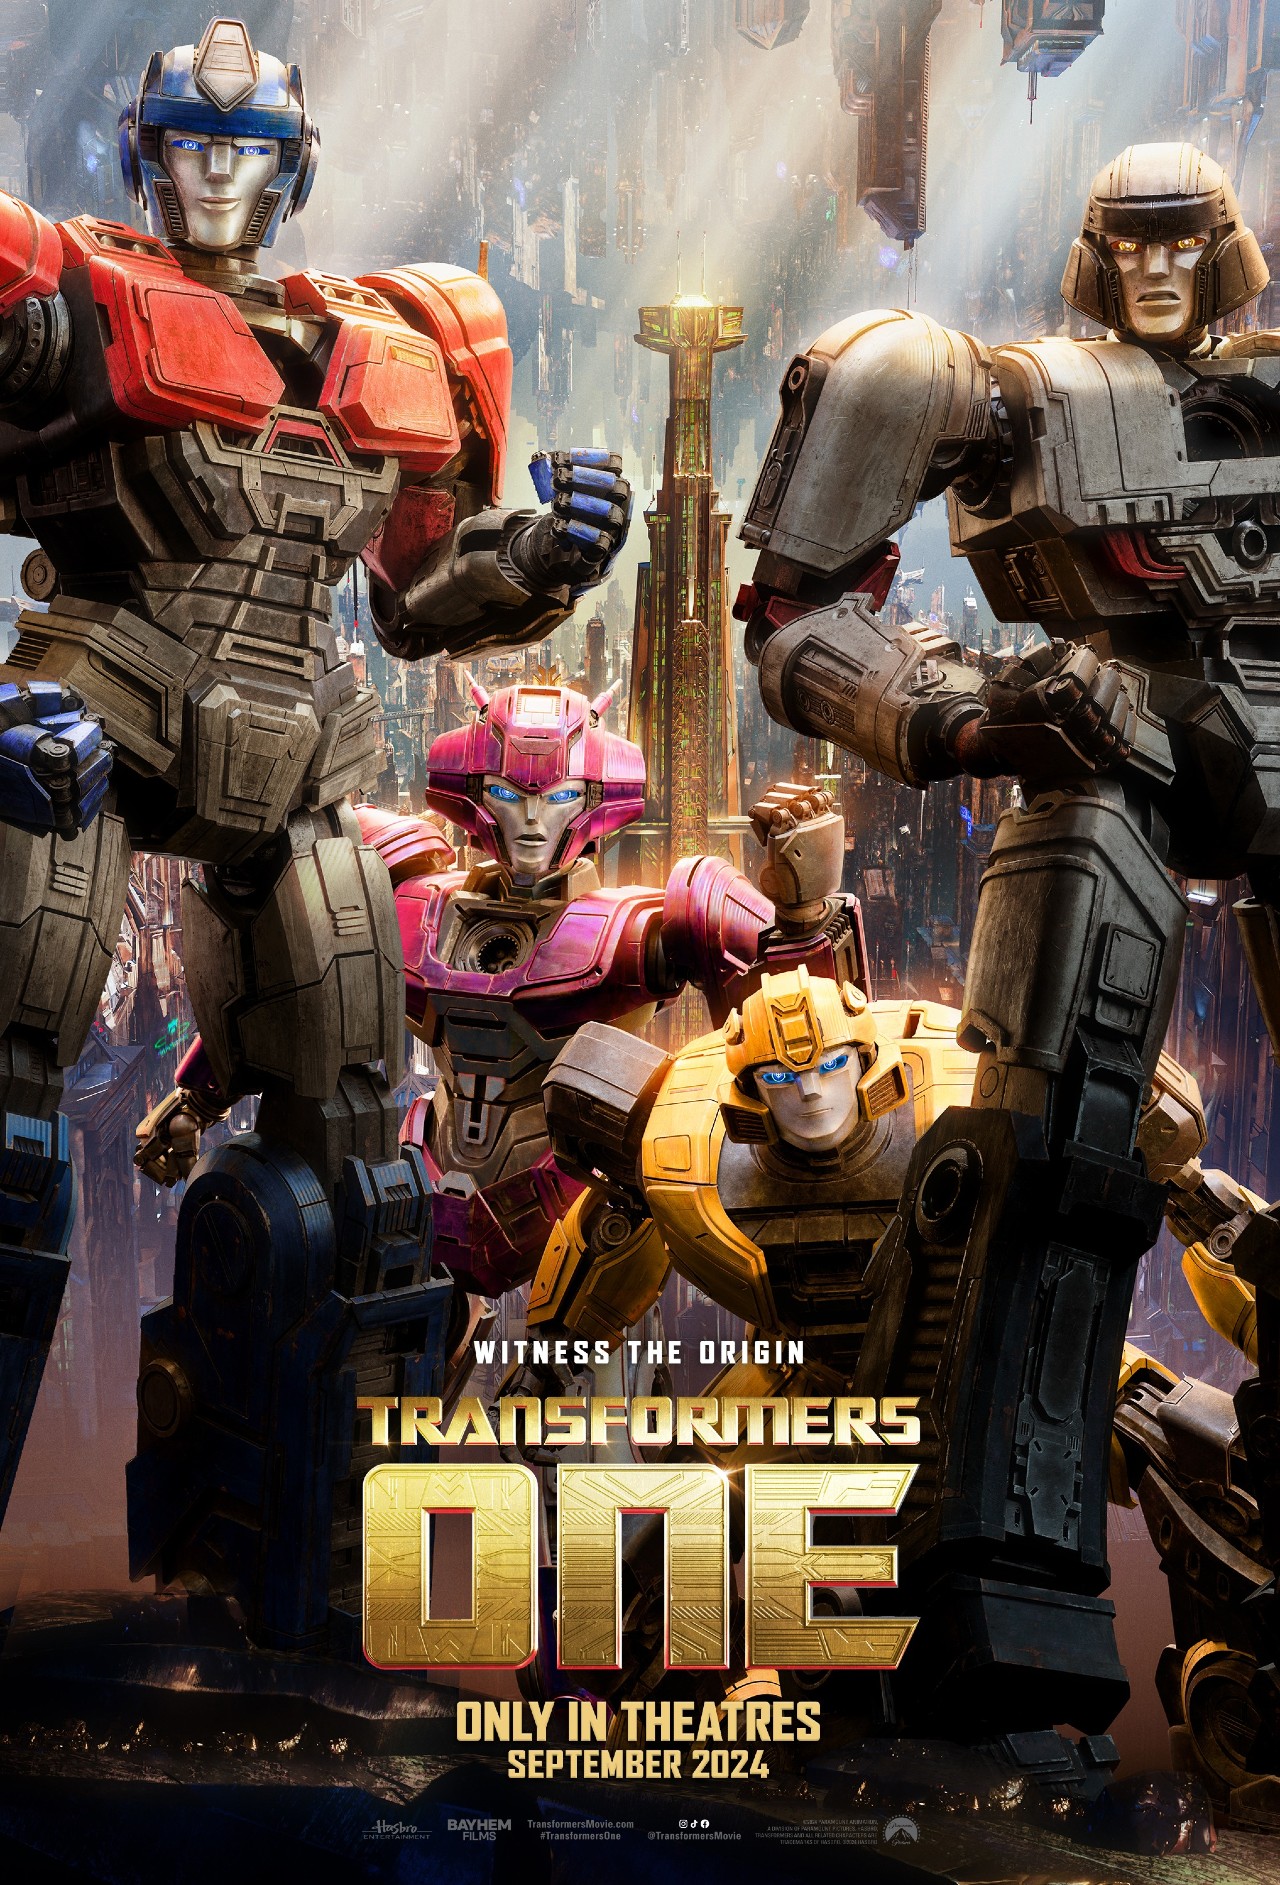 The first official movie poster for the animated movie 'Transformers One.' Four transformers are looking forward, pulling off their best battle poses with an air of confidence.